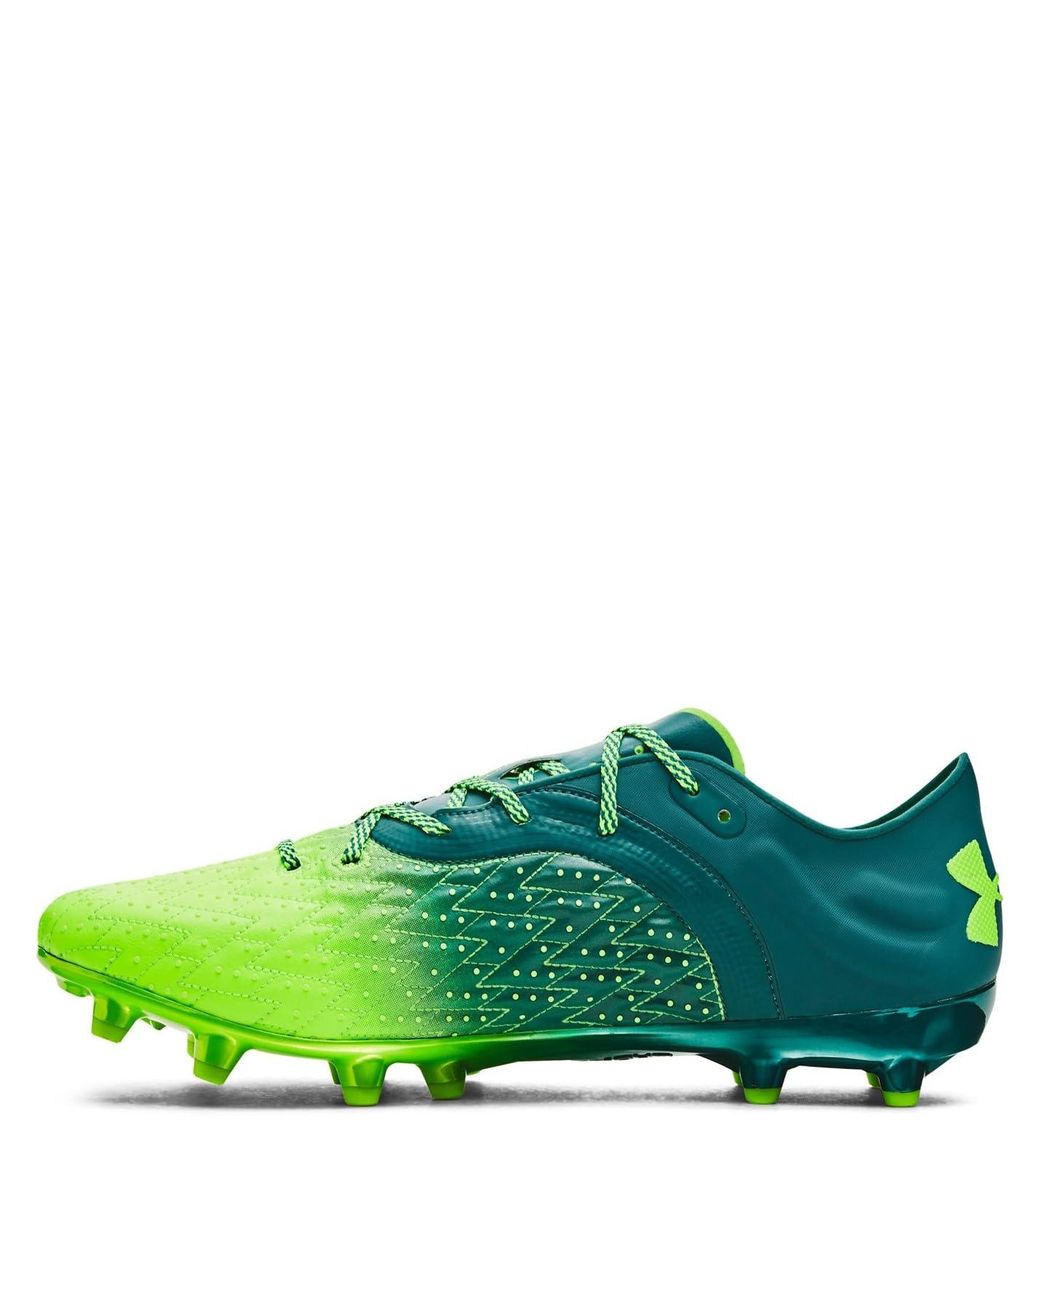 Under Armour S C Mag Pro 2 Football Boots Green 10.5 for Men | Lyst UK